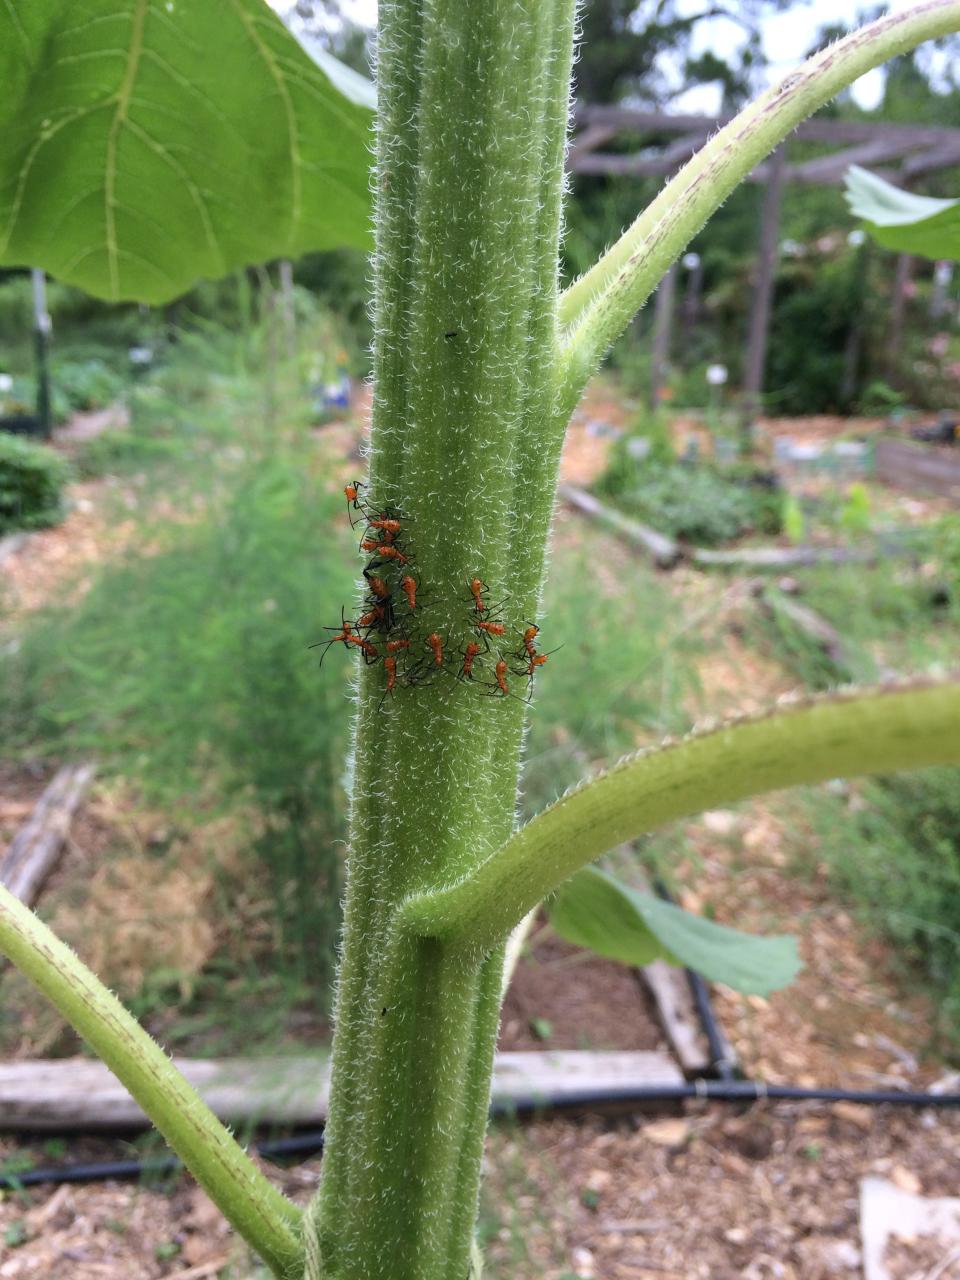 Sunflowers can attract leaf-footed bugs away from tomatoes. Hand pick and destroy any that you see for better control.